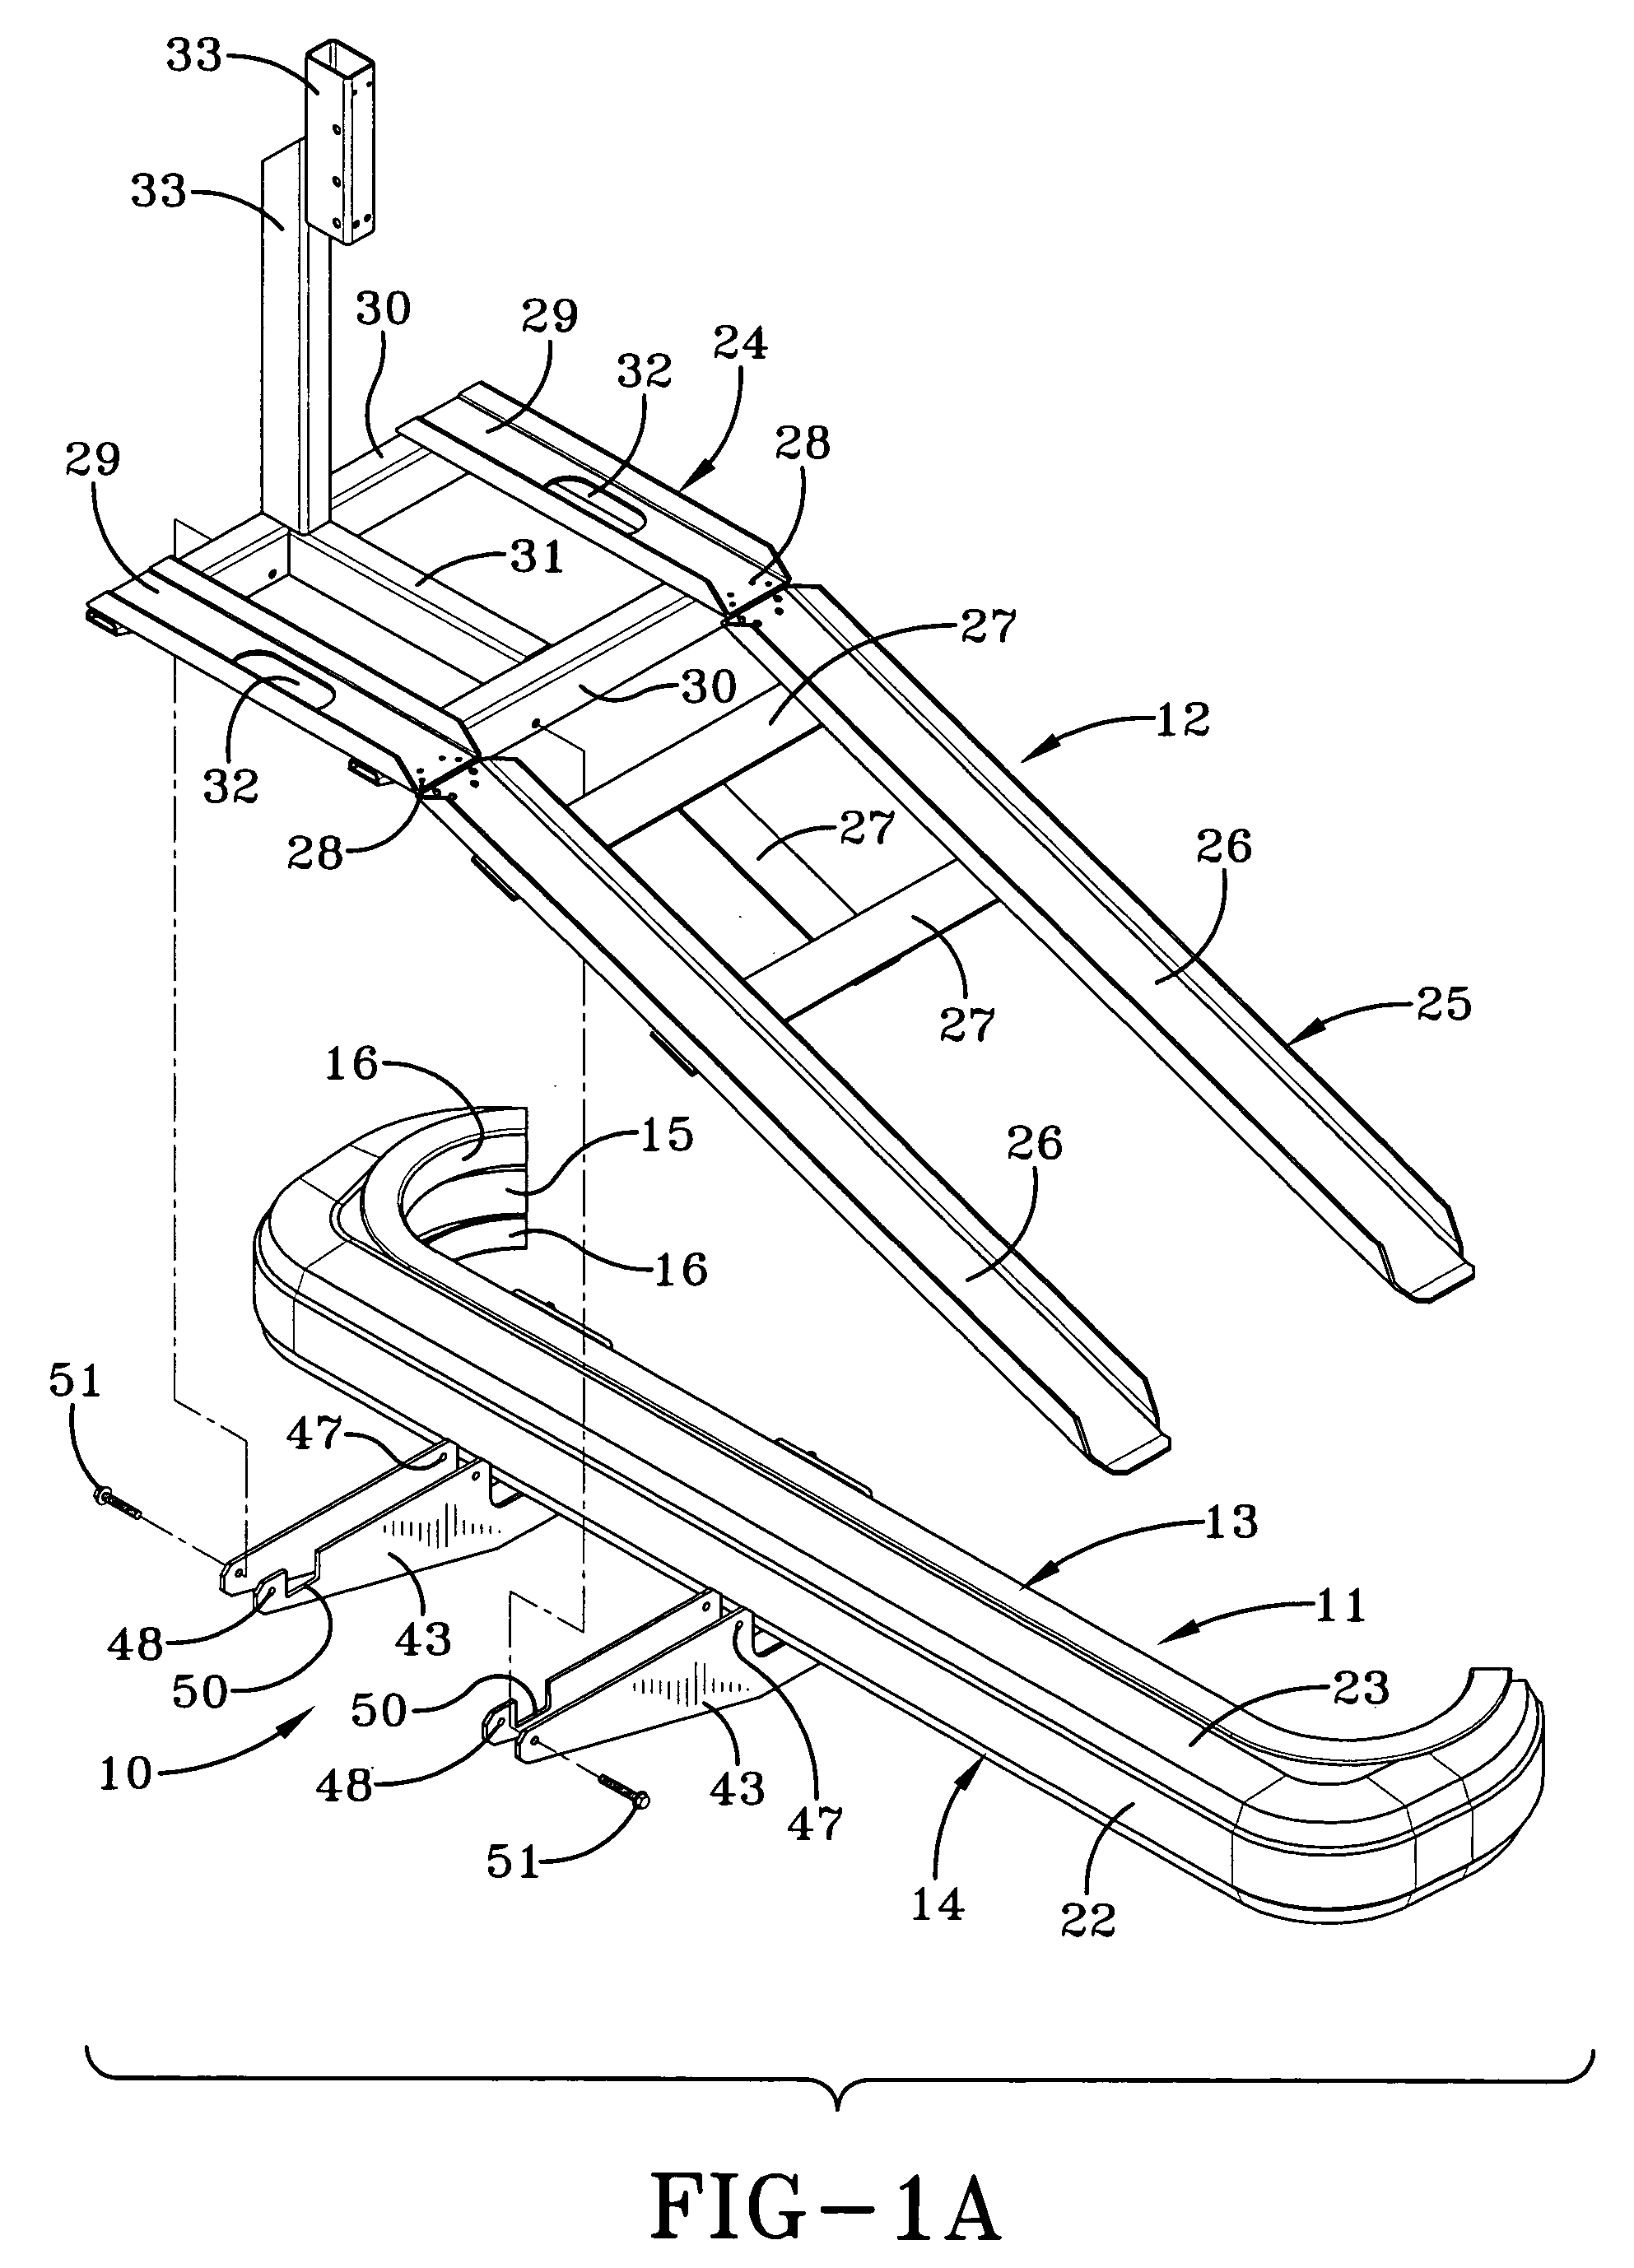 Energy absorbing system for attaching a trailing device to a vehicle